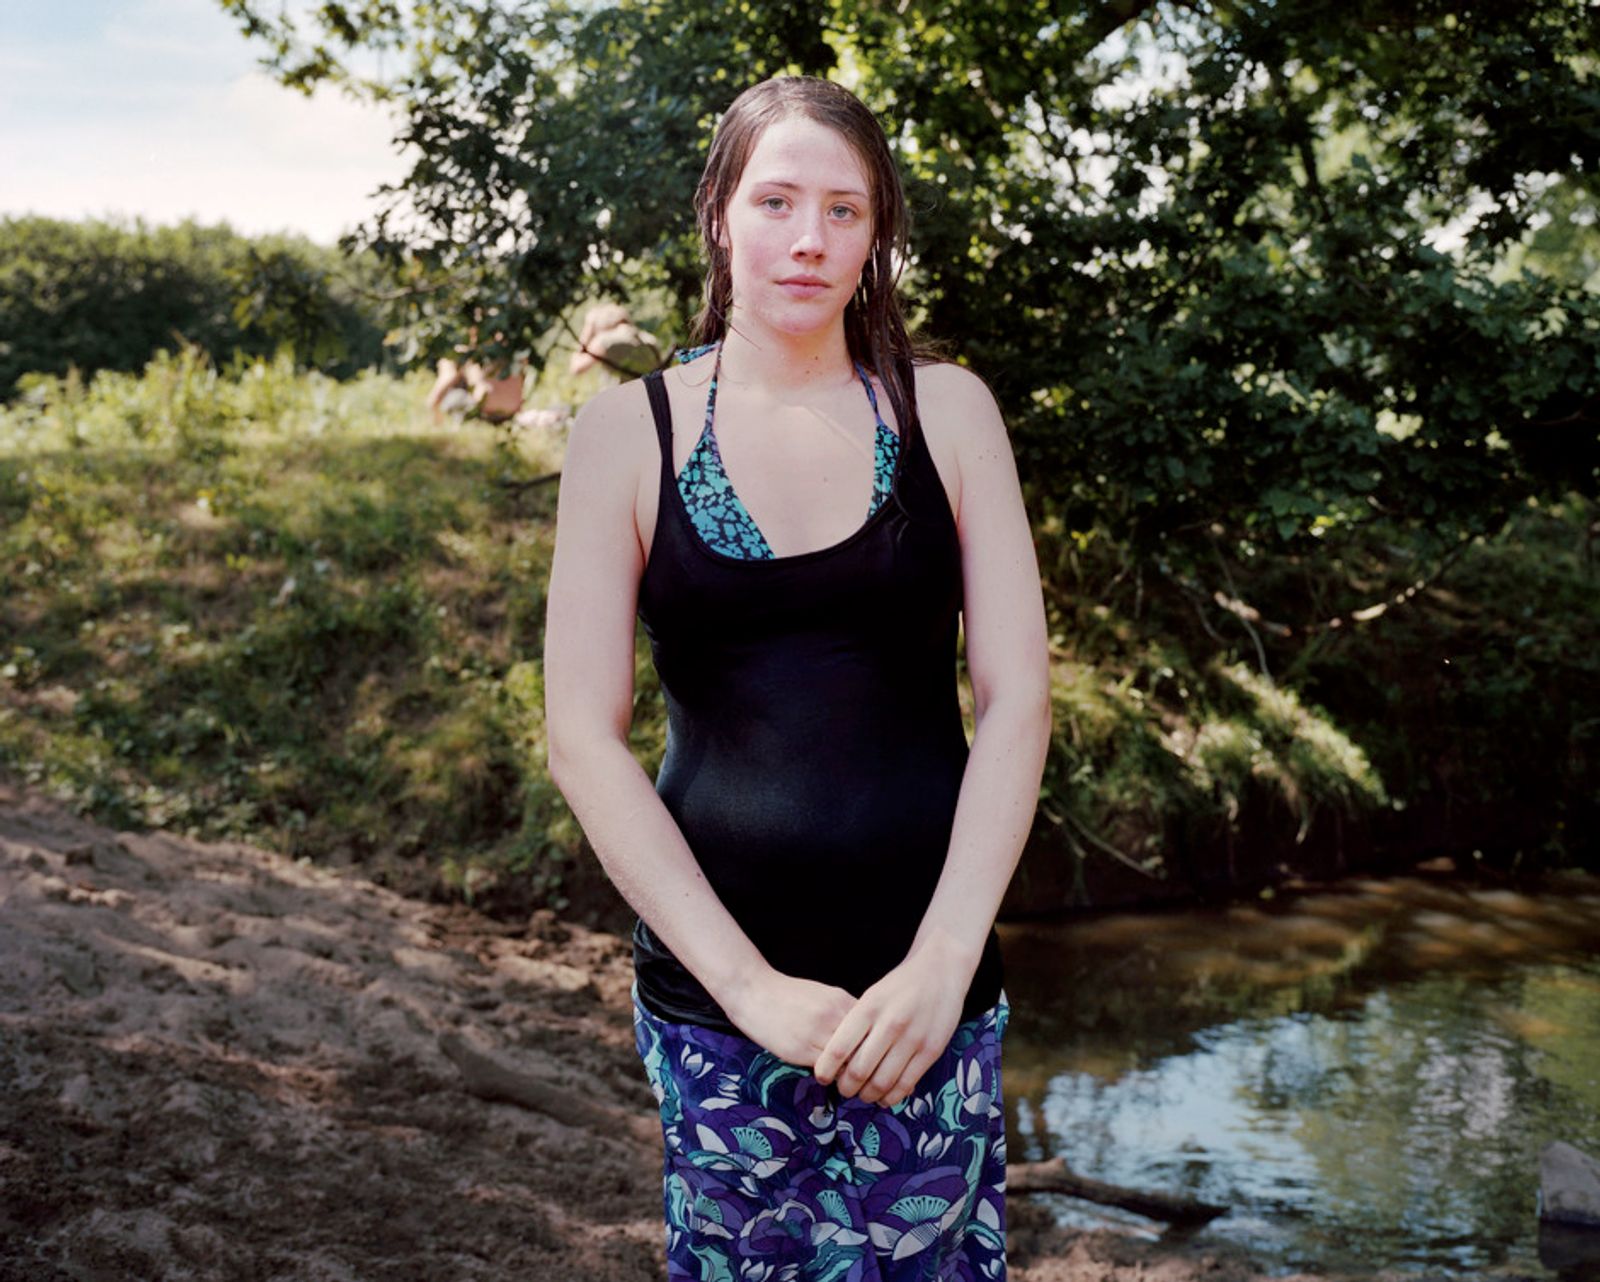 © Sian Davey - Image from the The River photography project